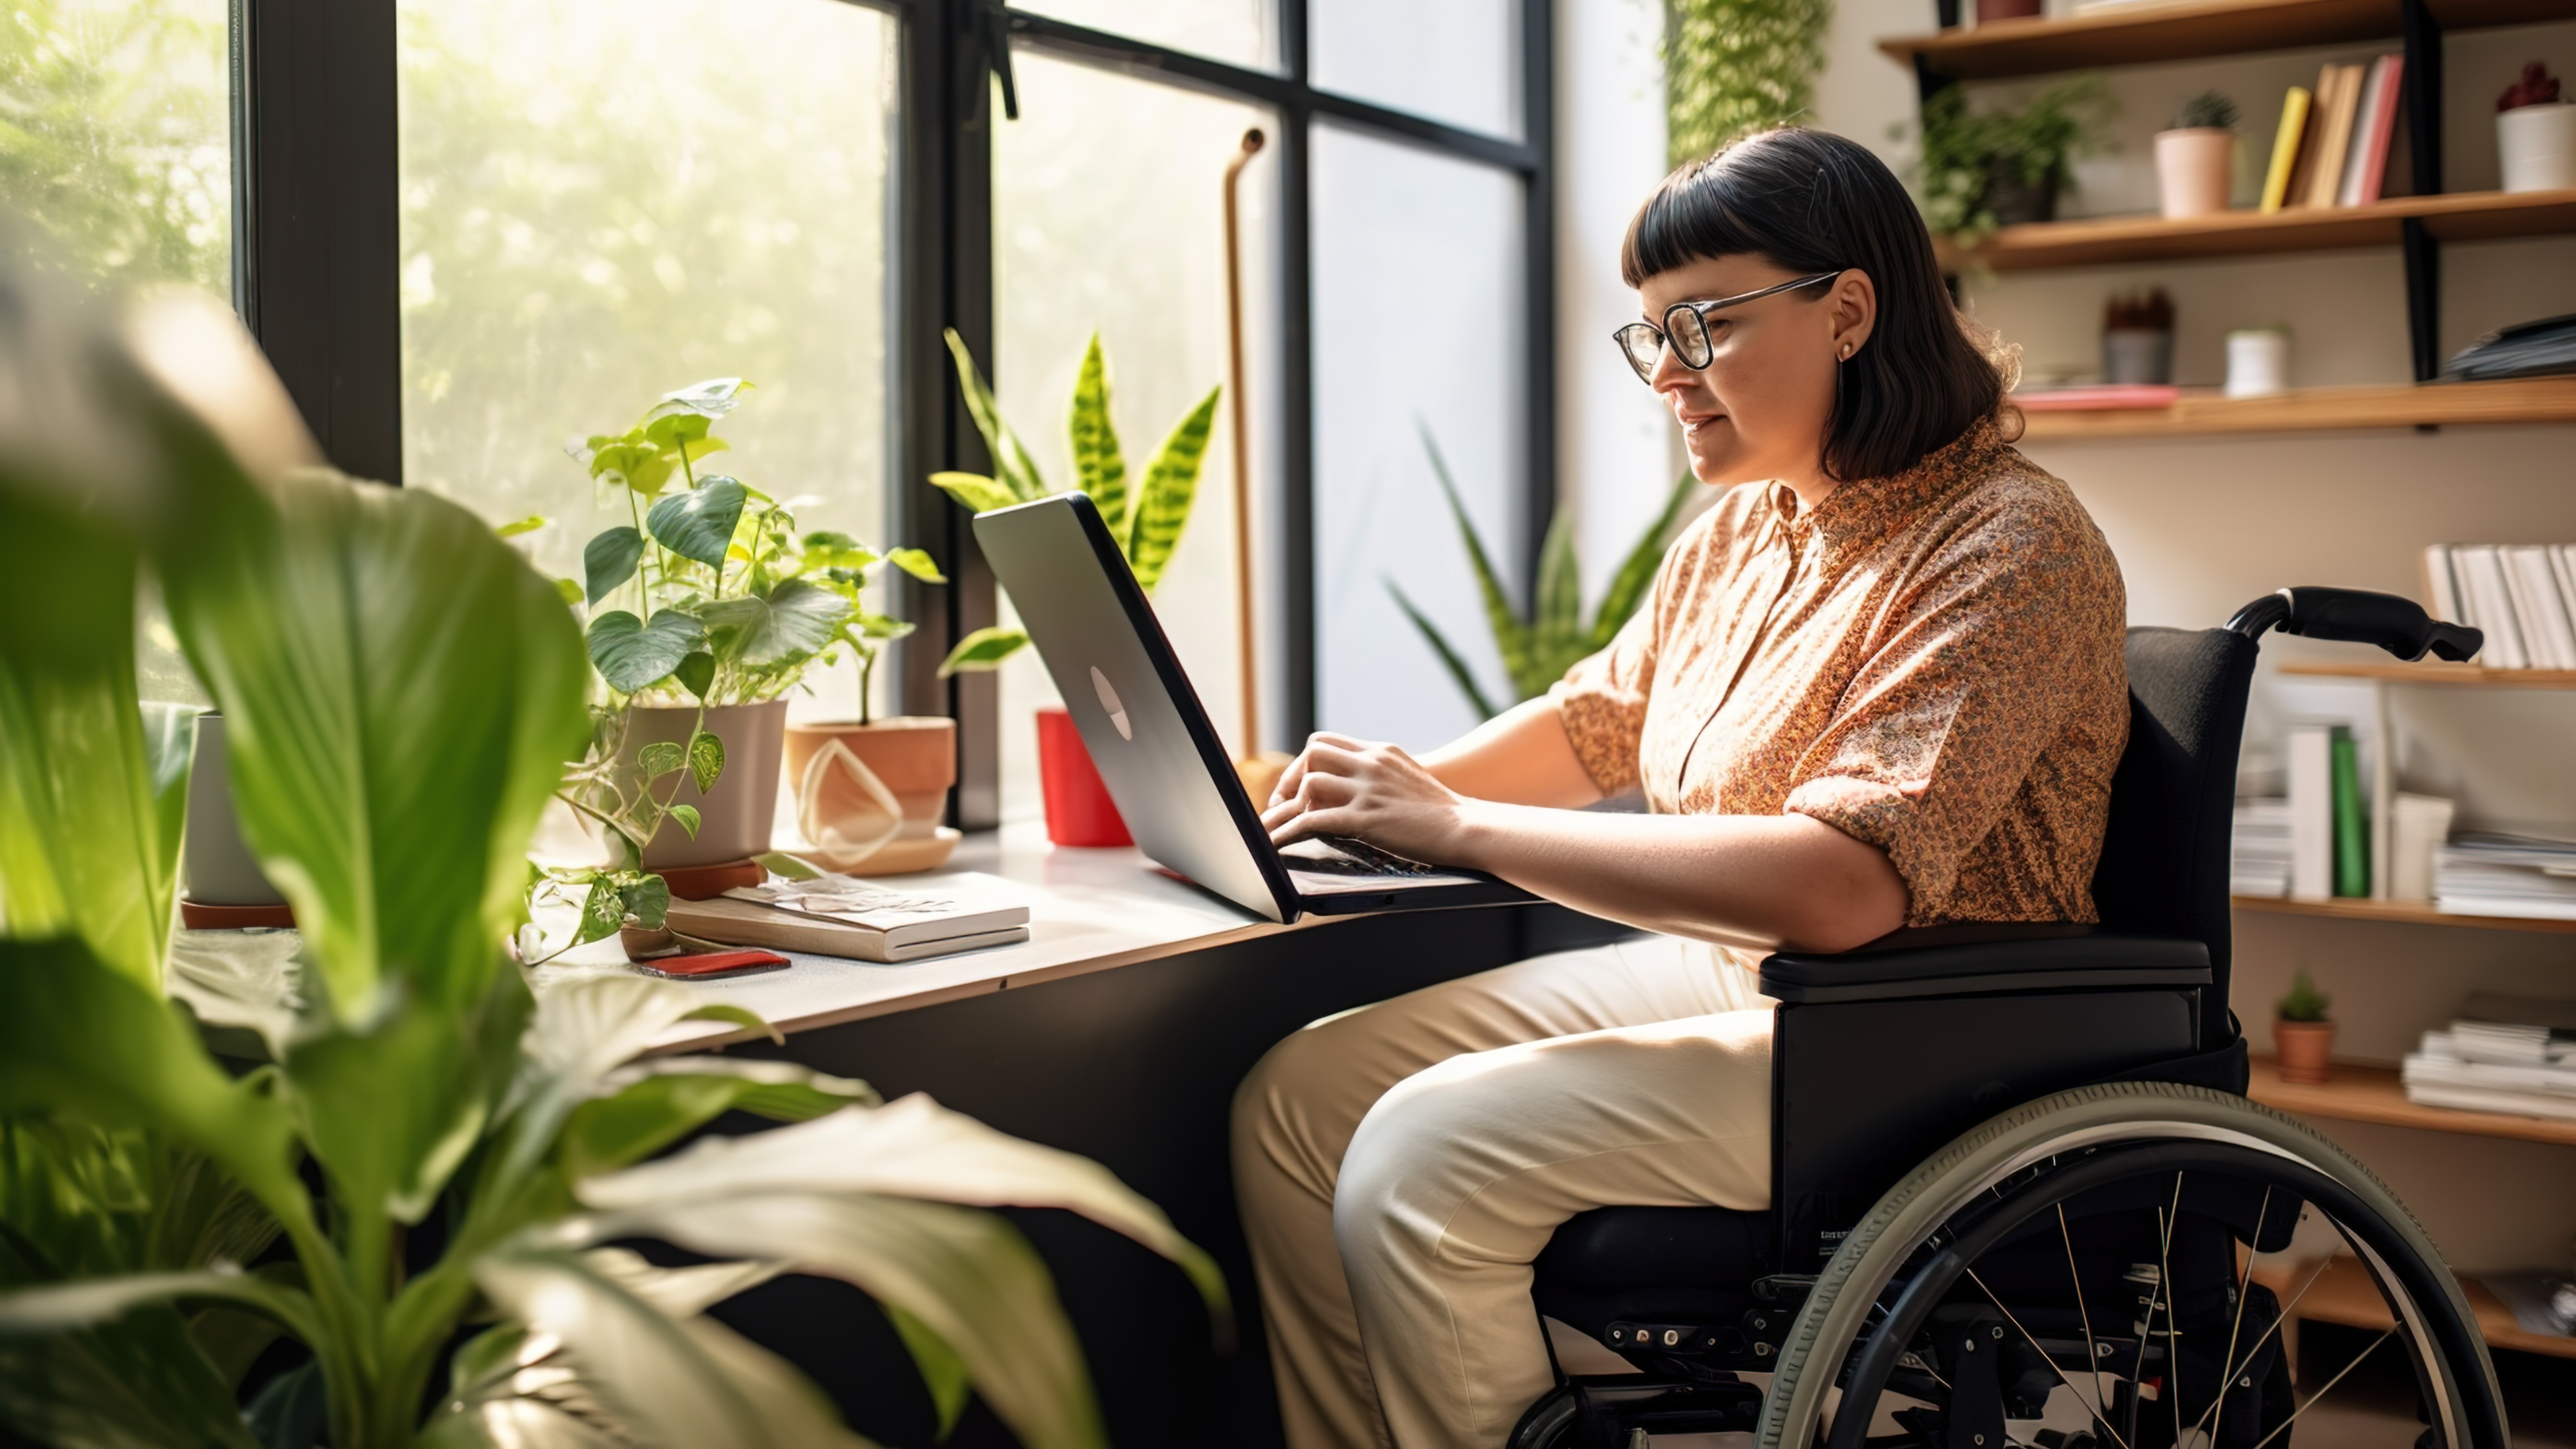 Student using a wheelchair, studying on a laptop with books and plants around them.